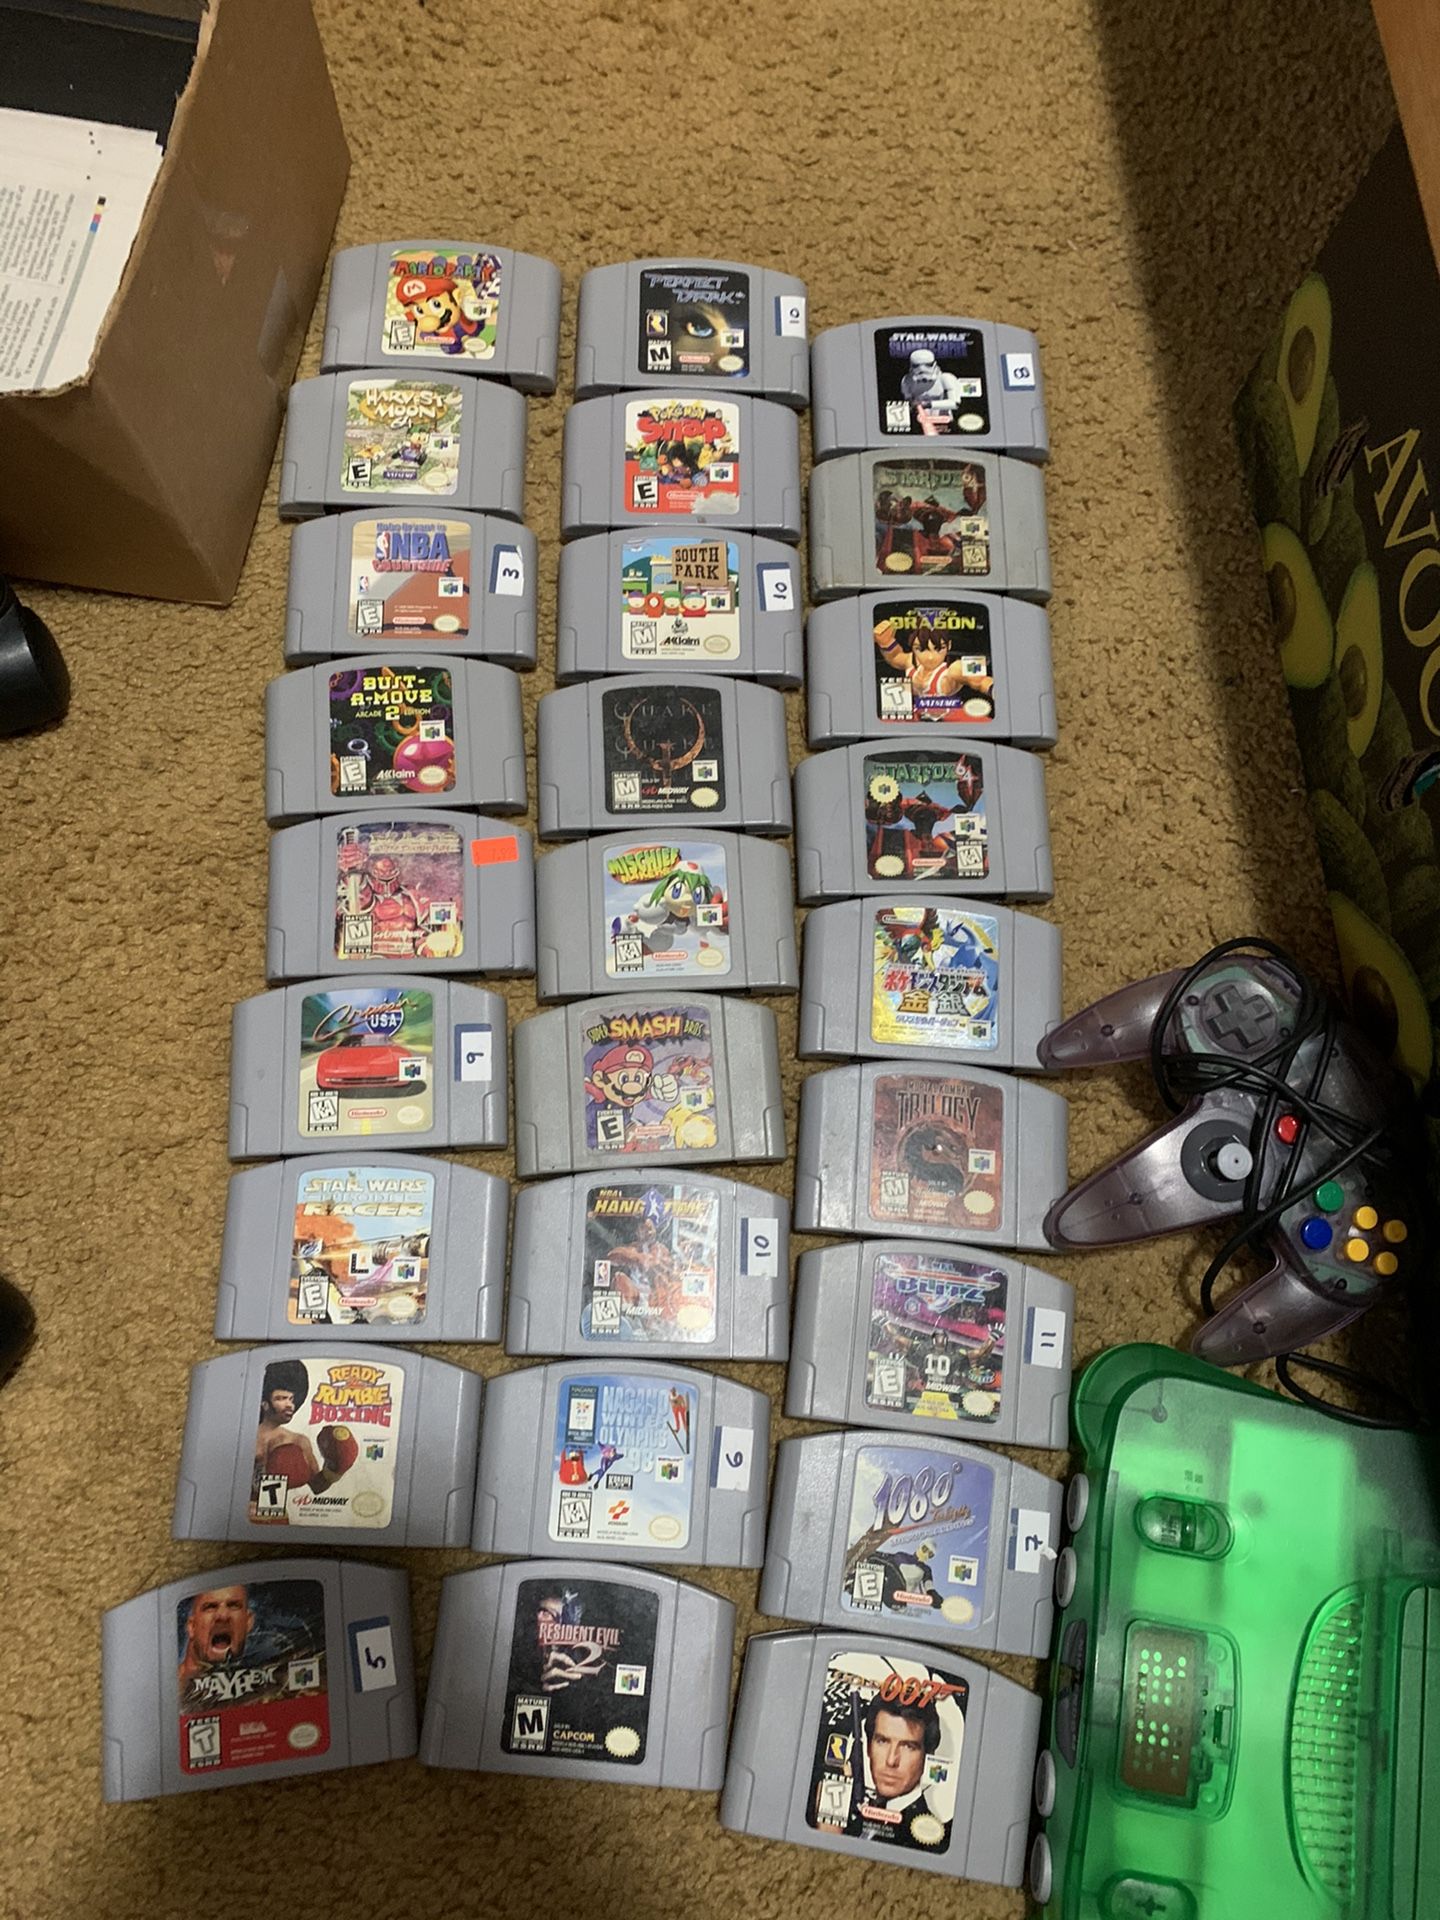 64 Games And Green N64 With Purple Controller 